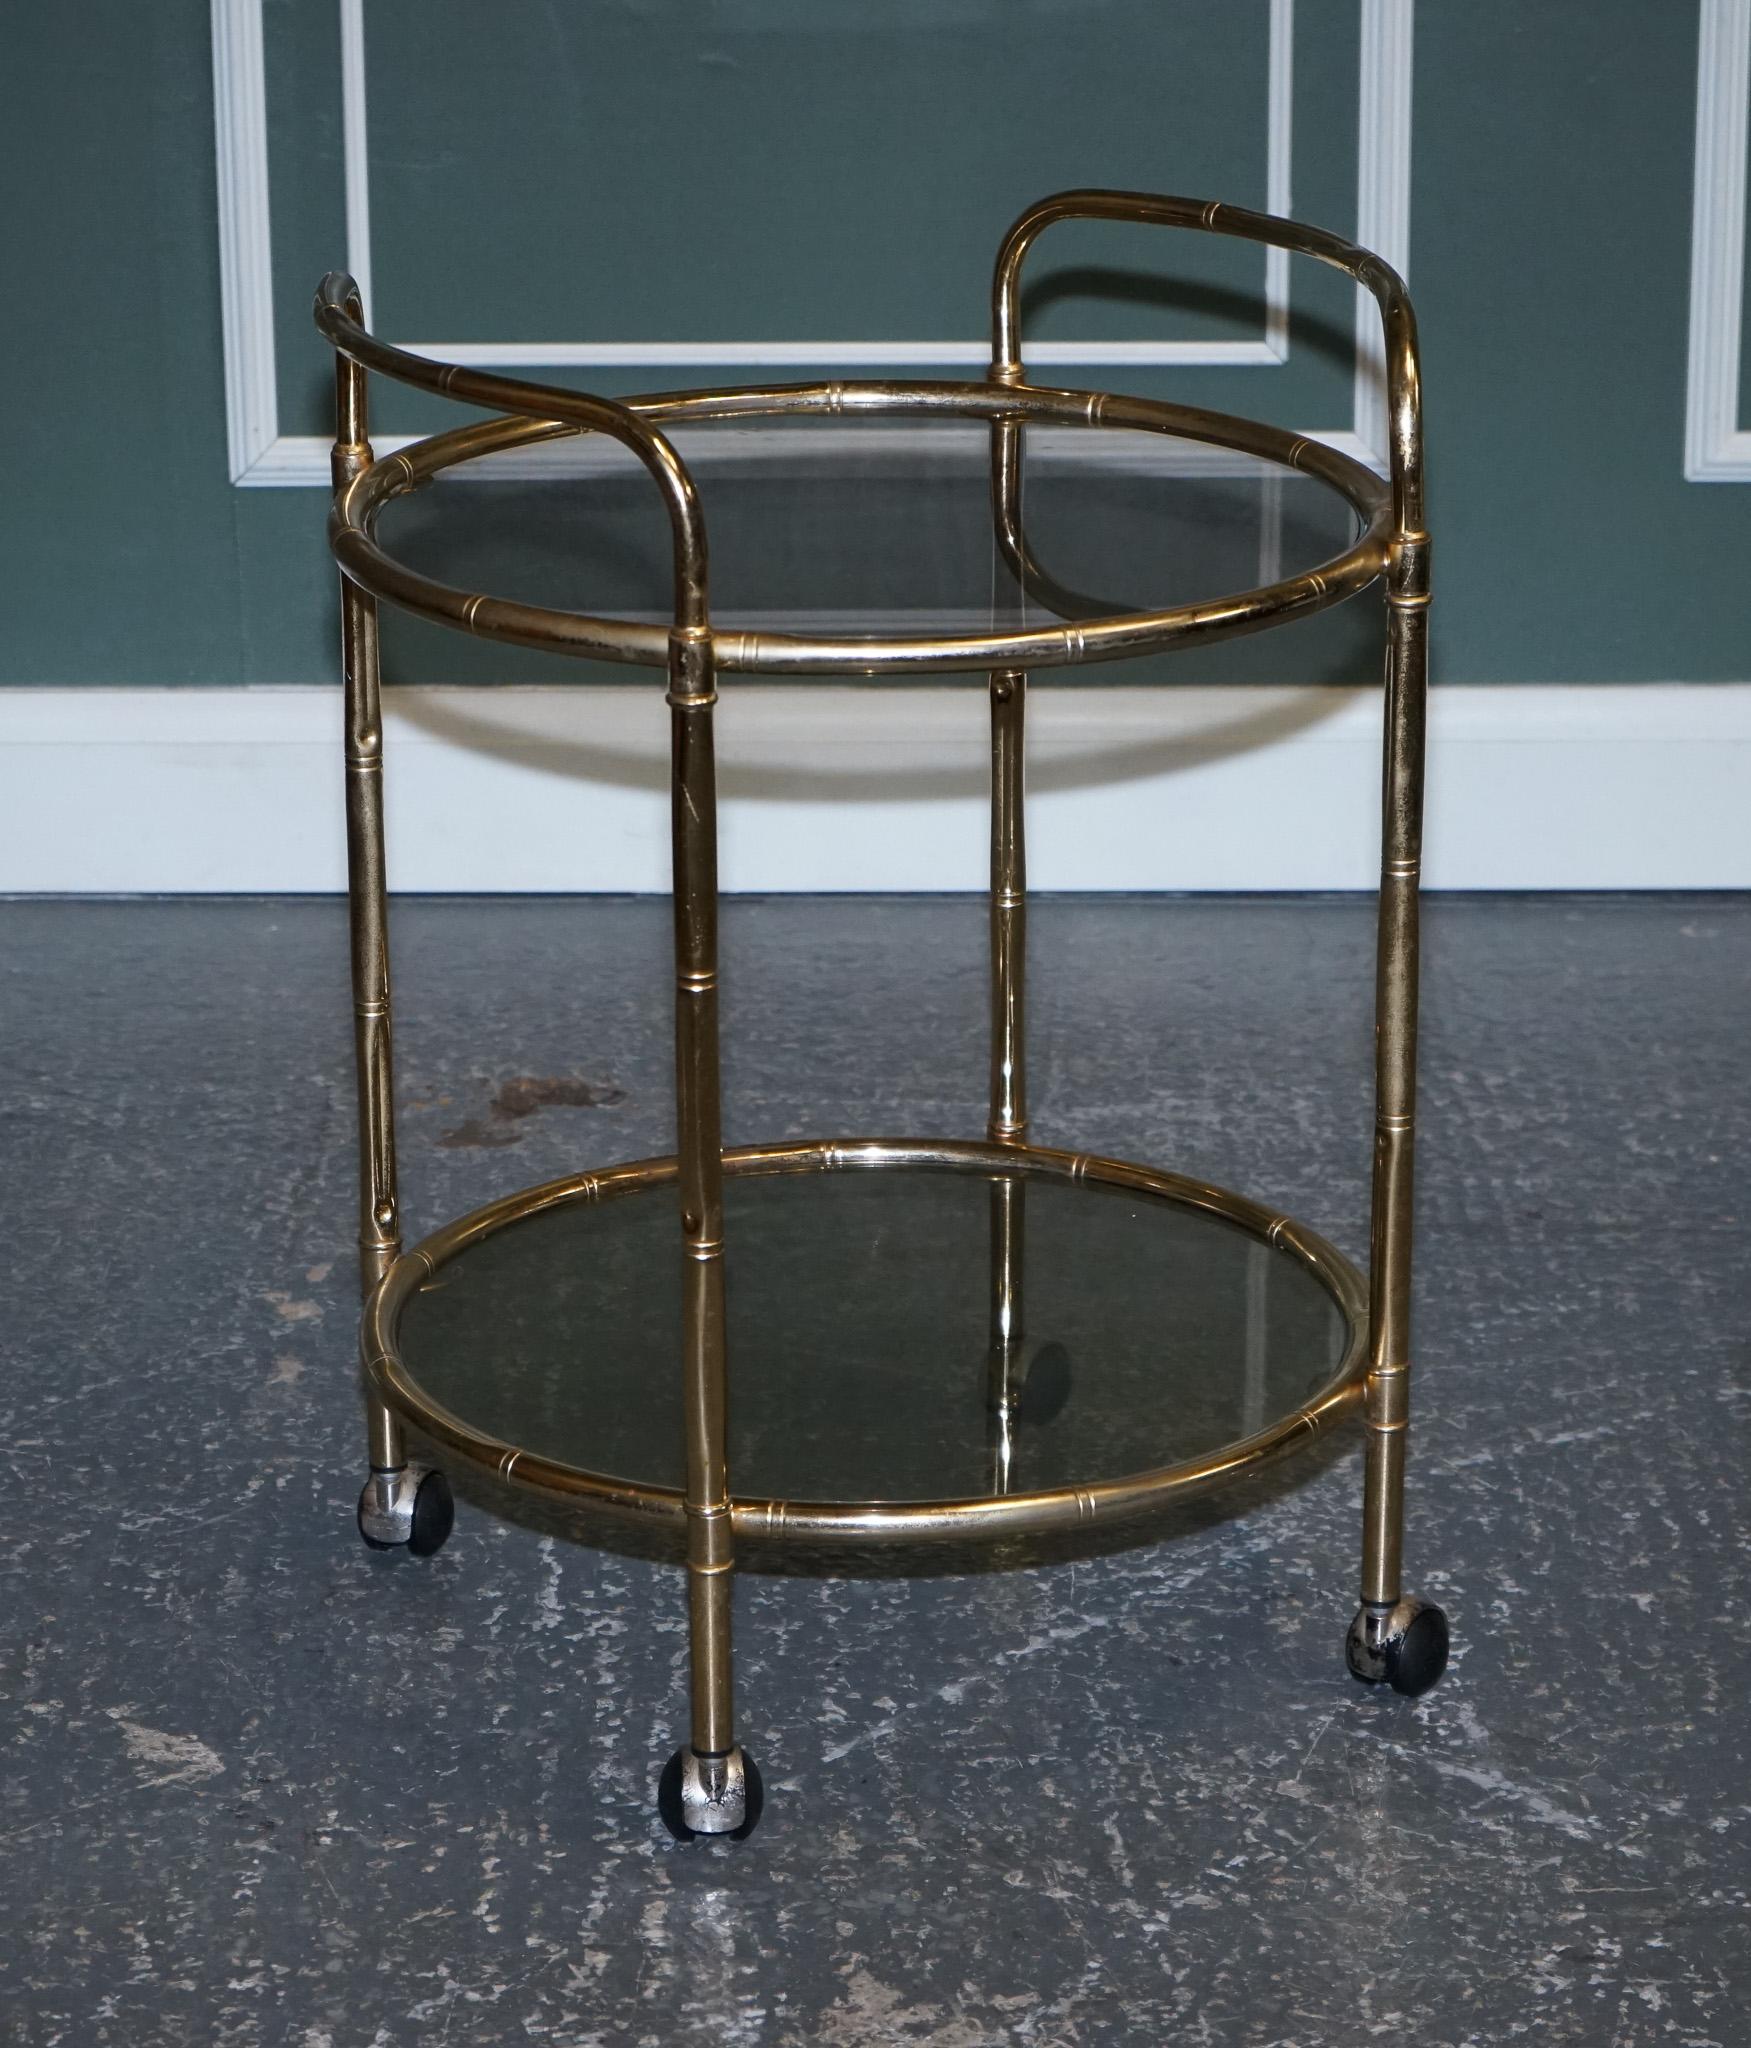 We are delighted to offer for sale this Hollywood Regency brass faux bamboo bar cart.

We have lightly restored this by cleaning it all over, lightly hand polished.

Please carefully examine the pictures to see the condition before purchasing,